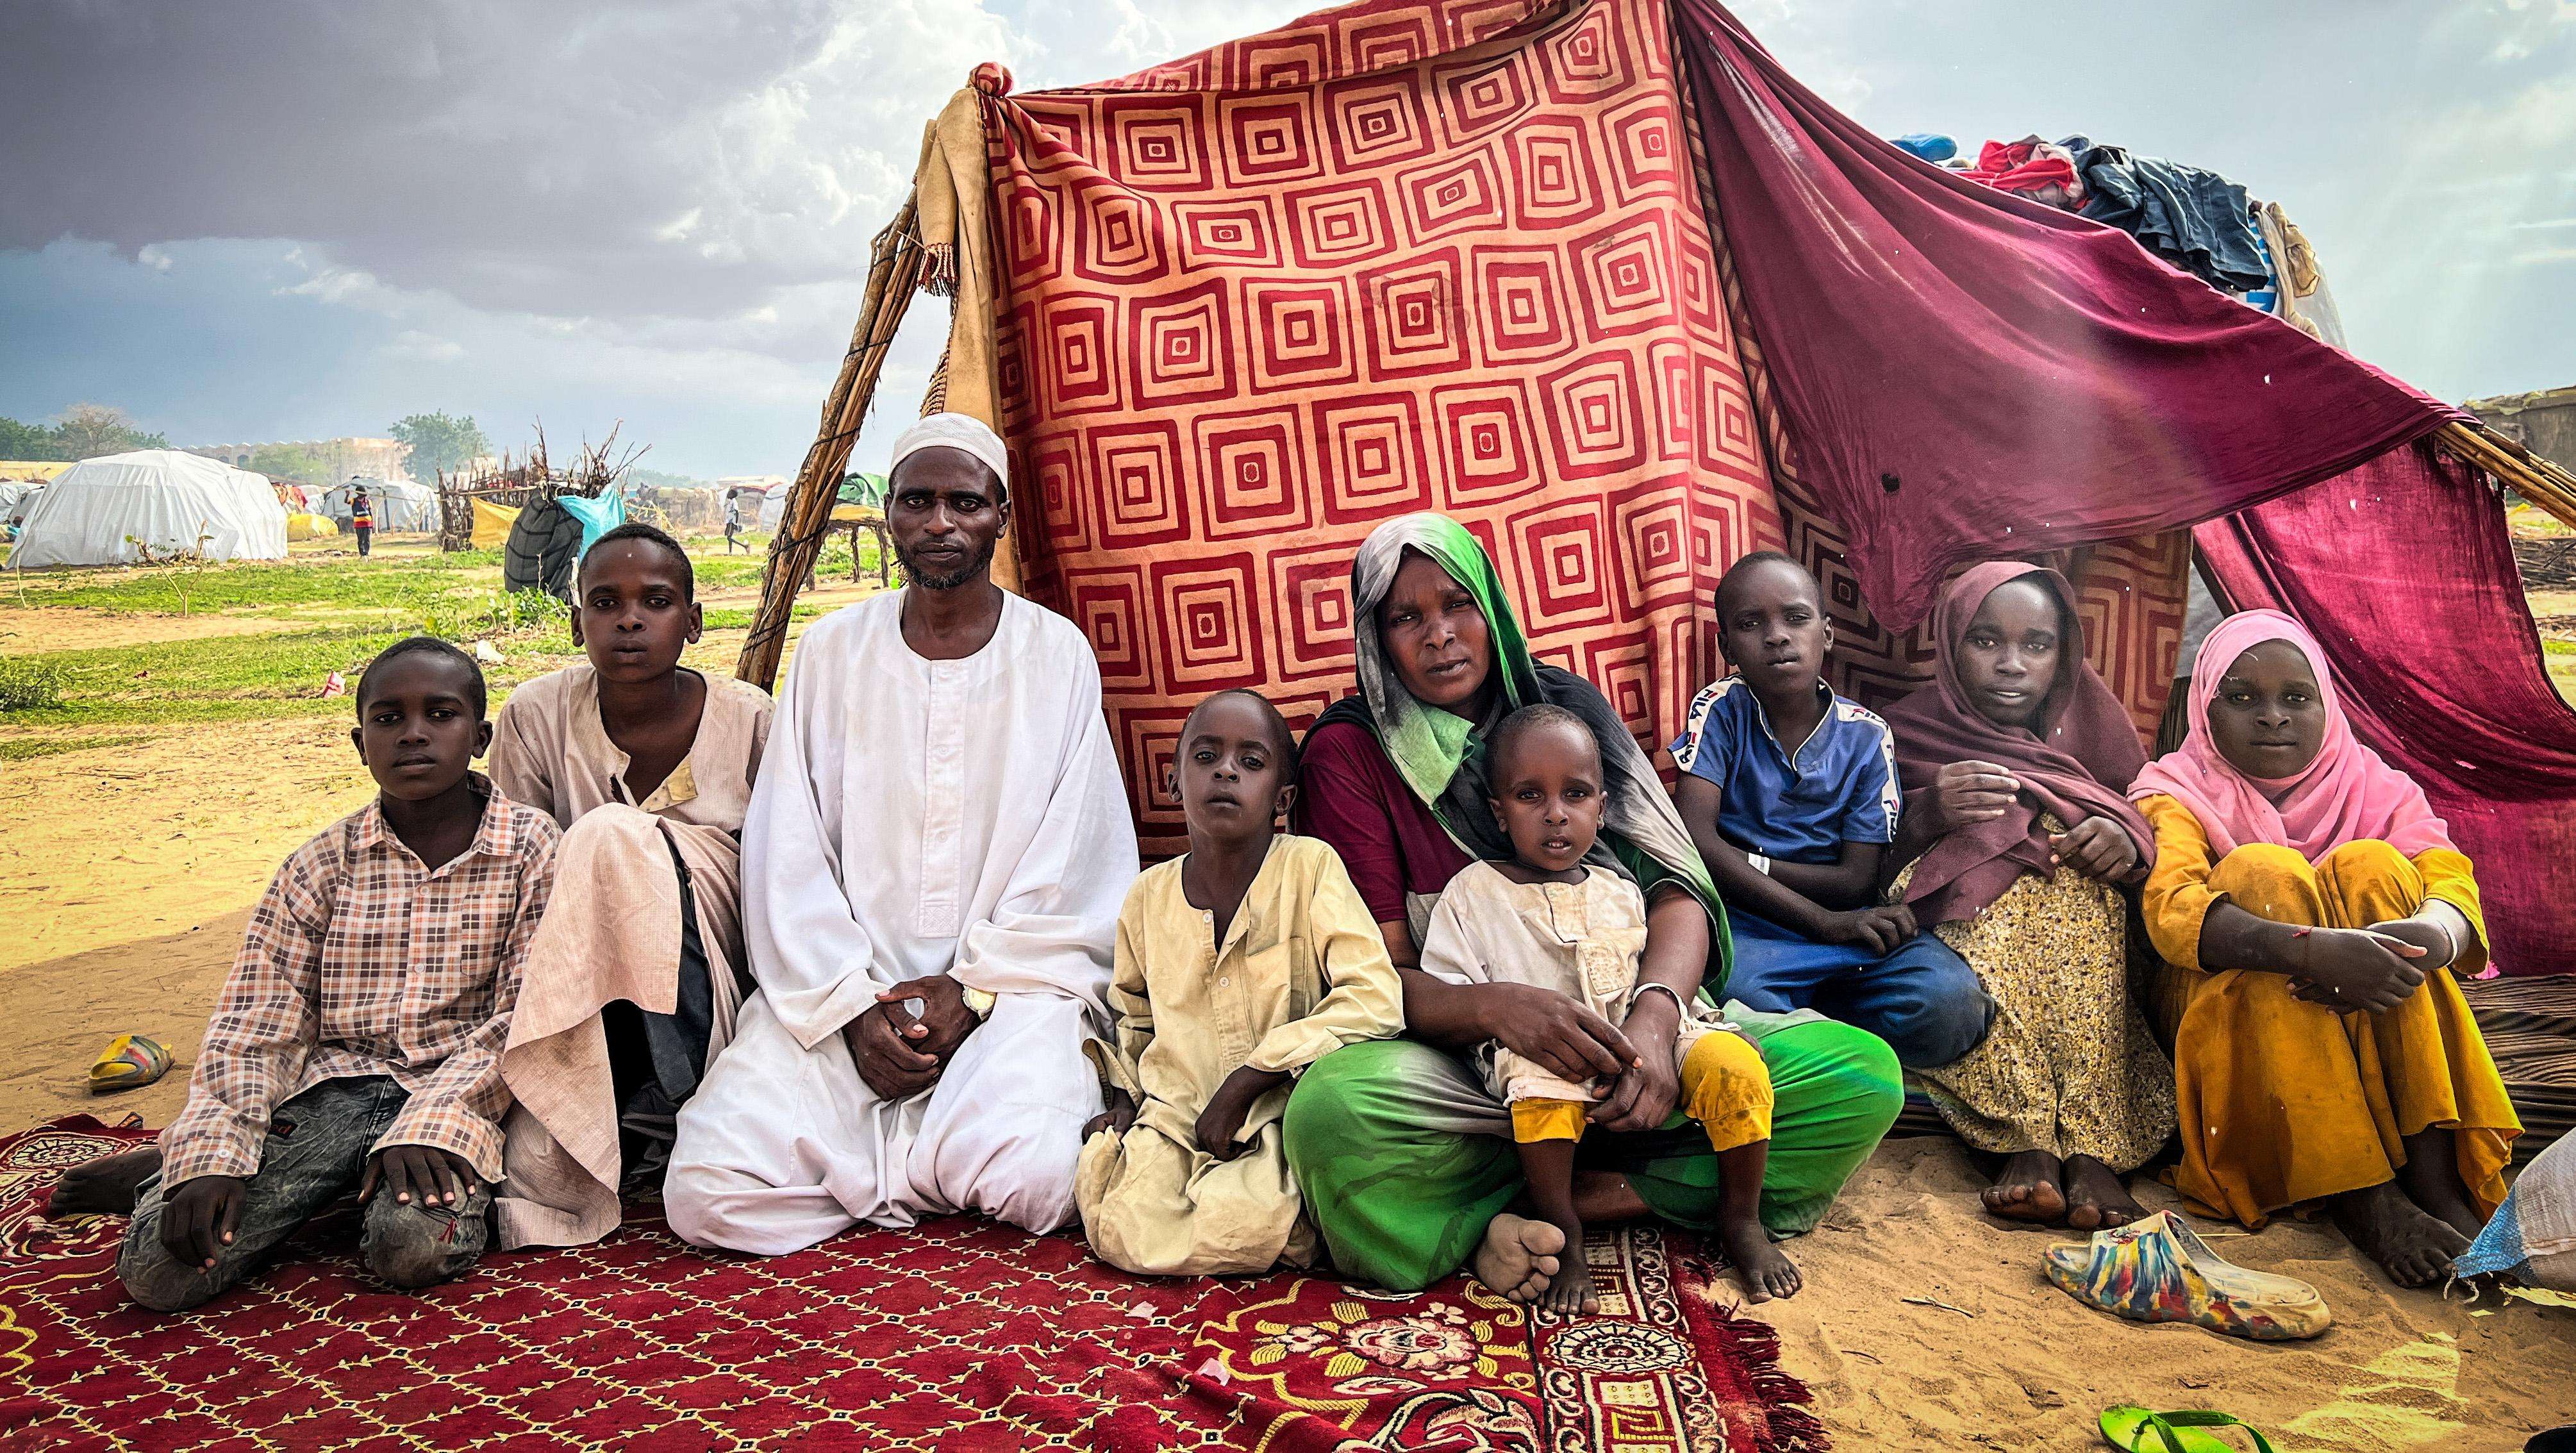 A family of Sudanese refugees sit in front of a makeshift tent in a refugee camp in Chad